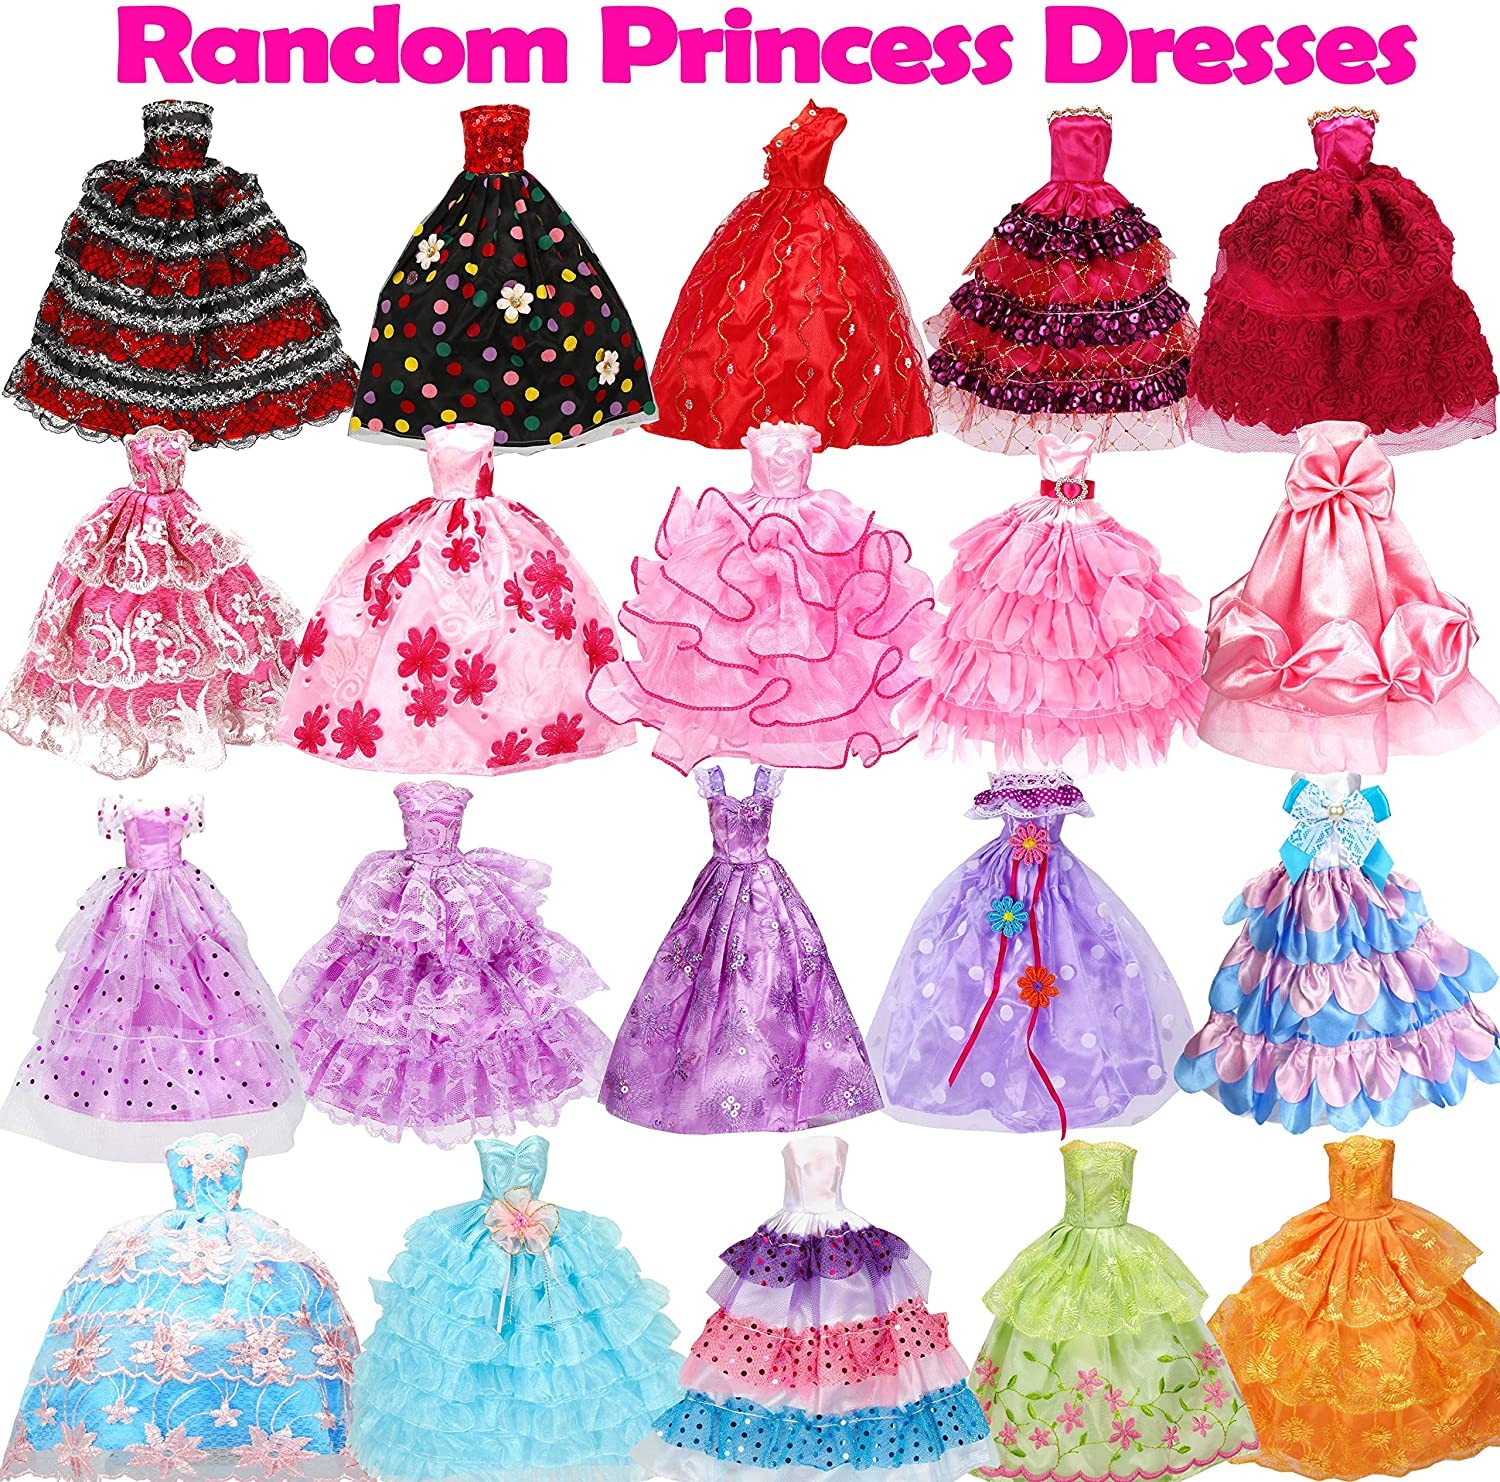 Accessories 22 50-Pack Handmade Doll Clothing & Accessories Includes 5 Wedding Dresses 5 Fashion Dresses 4 Ankle Skirts 3 Tops & Pants 3 Bikini 20 Shoes & Giveaways 10 Hooks for 11.5'' Dolls